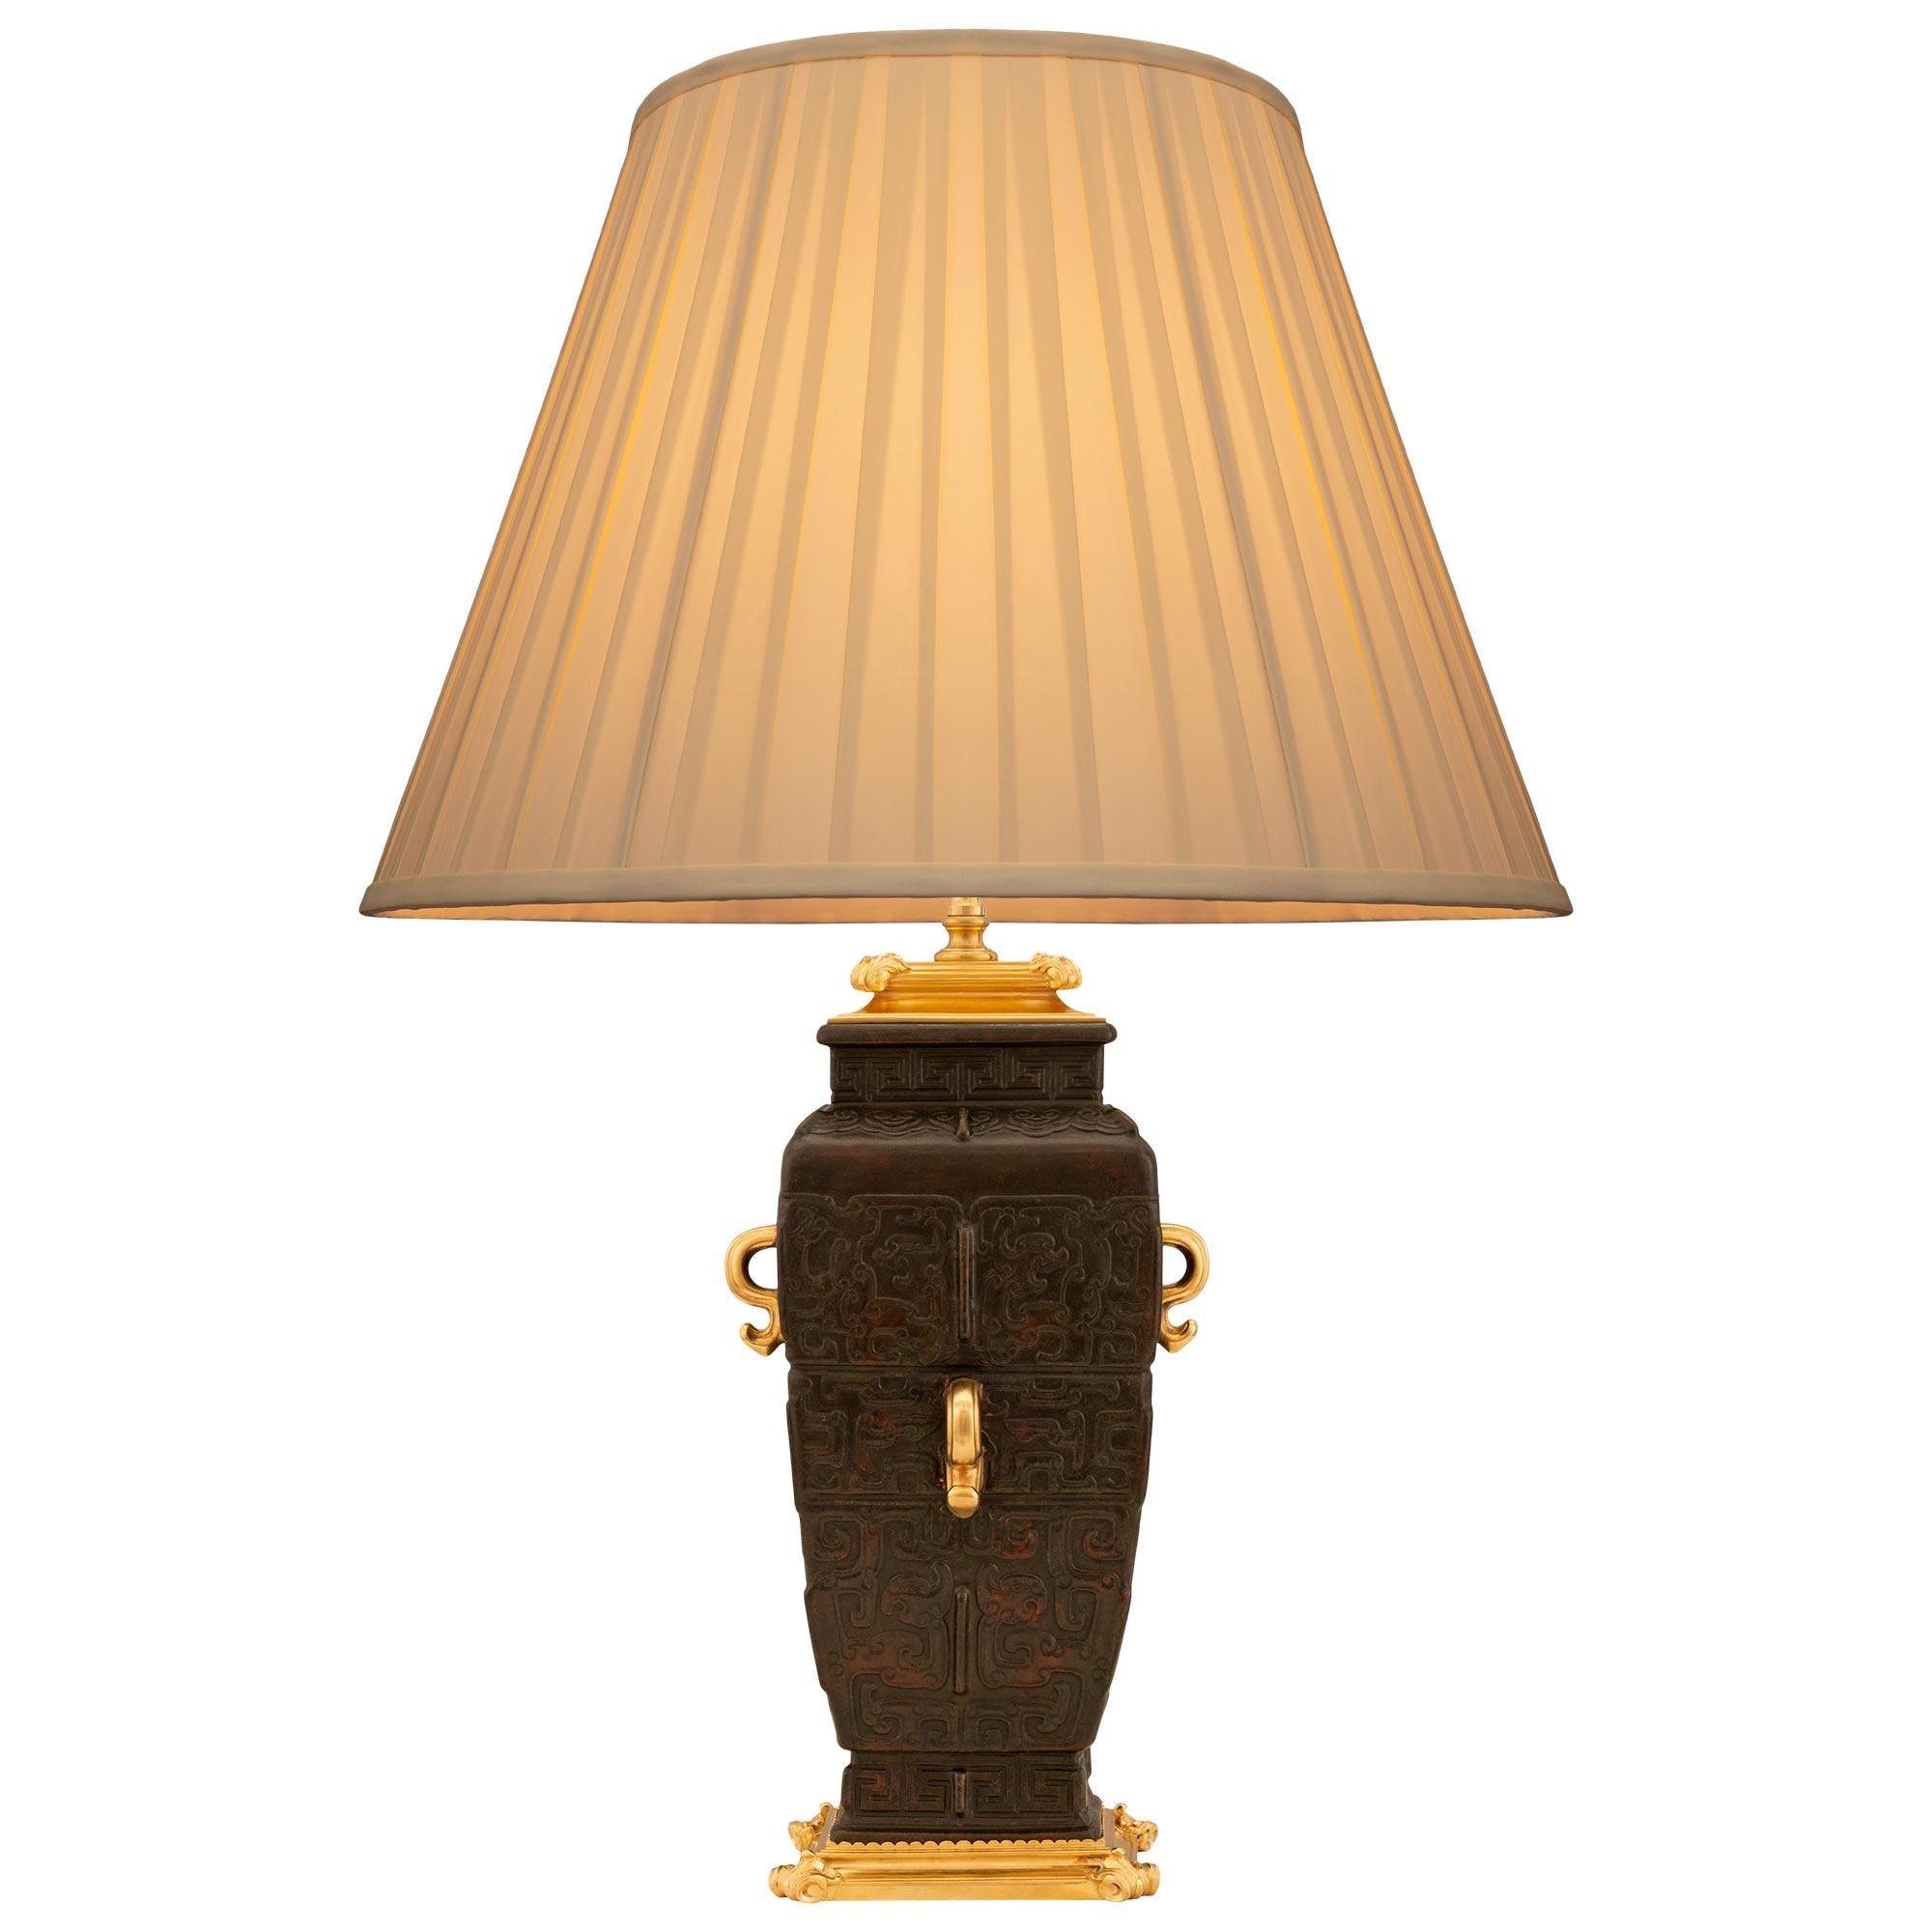 American 19th Century Patinated Bronze and Ormolu Lamp by E.F. Caldwell & Co. For Sale 6